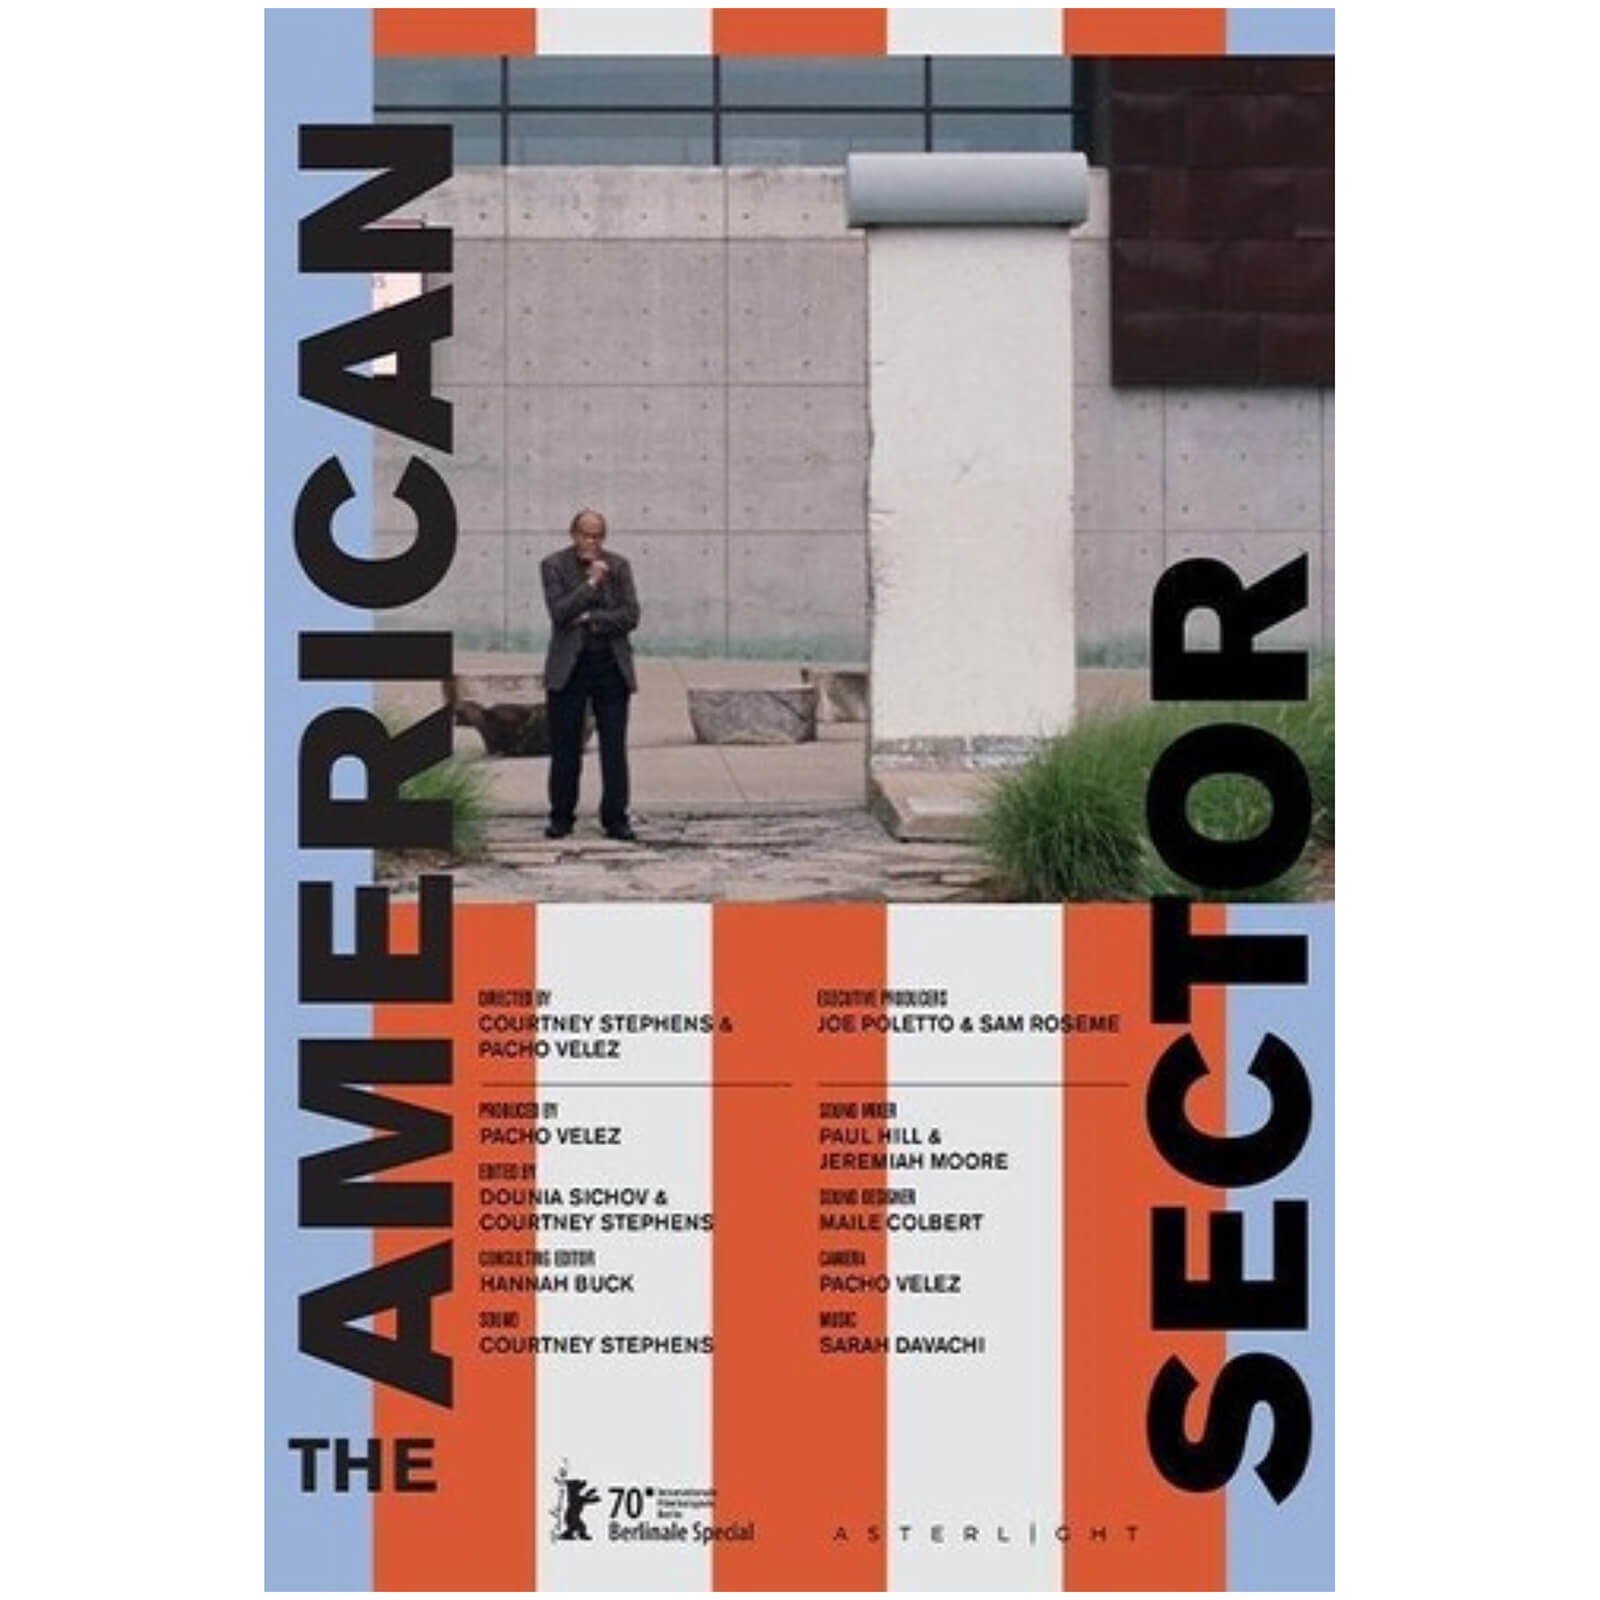 The American Sector